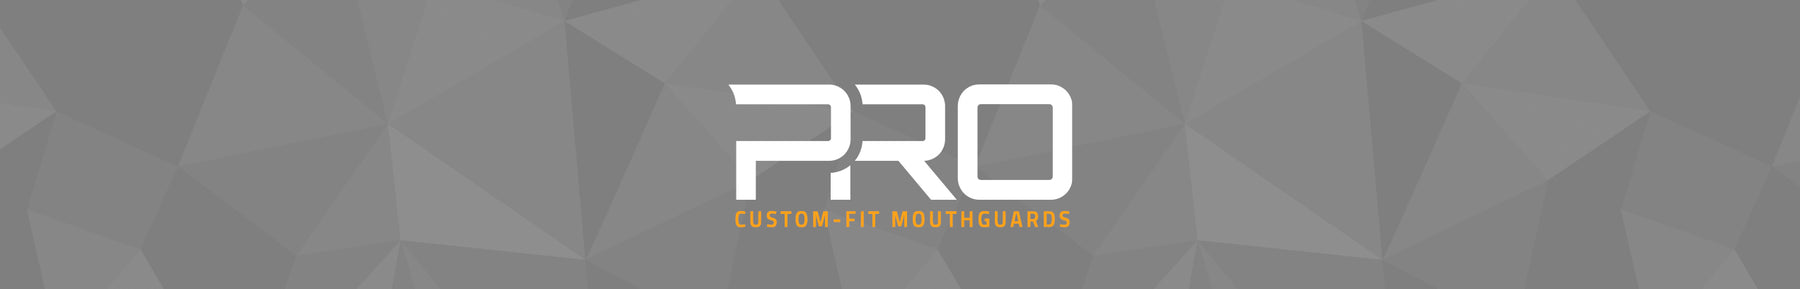 banner, Pro Custom fit mouthguard 